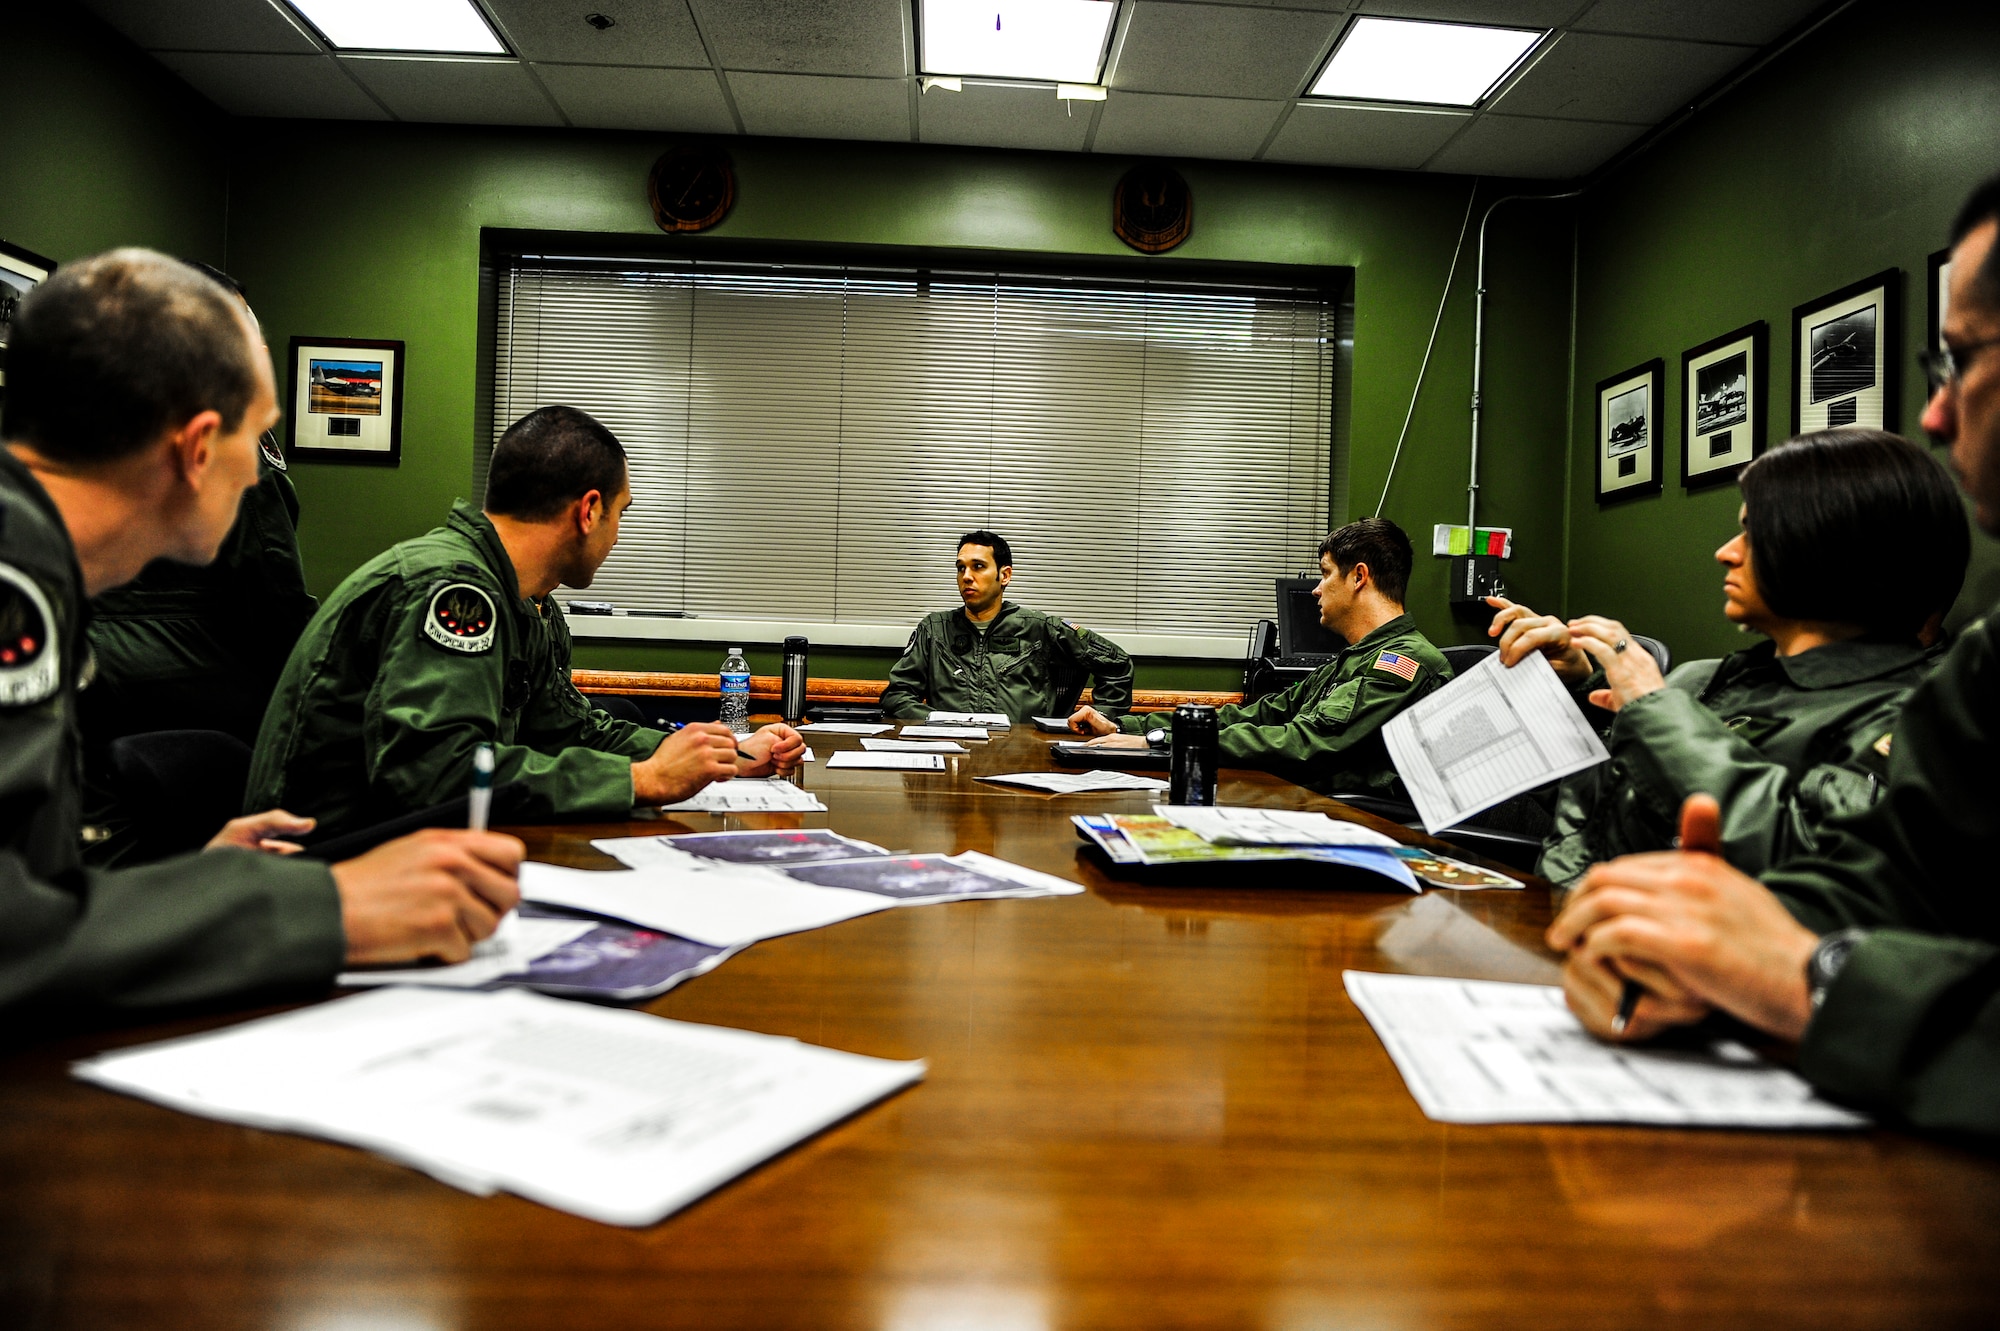 Members from the 15th Special Operations Squadron go over flight plans at Hurlburt Field, Fla., Jan. 7, 2014. The crew planned a high-altitude low-opening jump for members from the 24th Special Operations Wing. (U.S. Air Force photo/Senior Airman Christopher Callaway) 